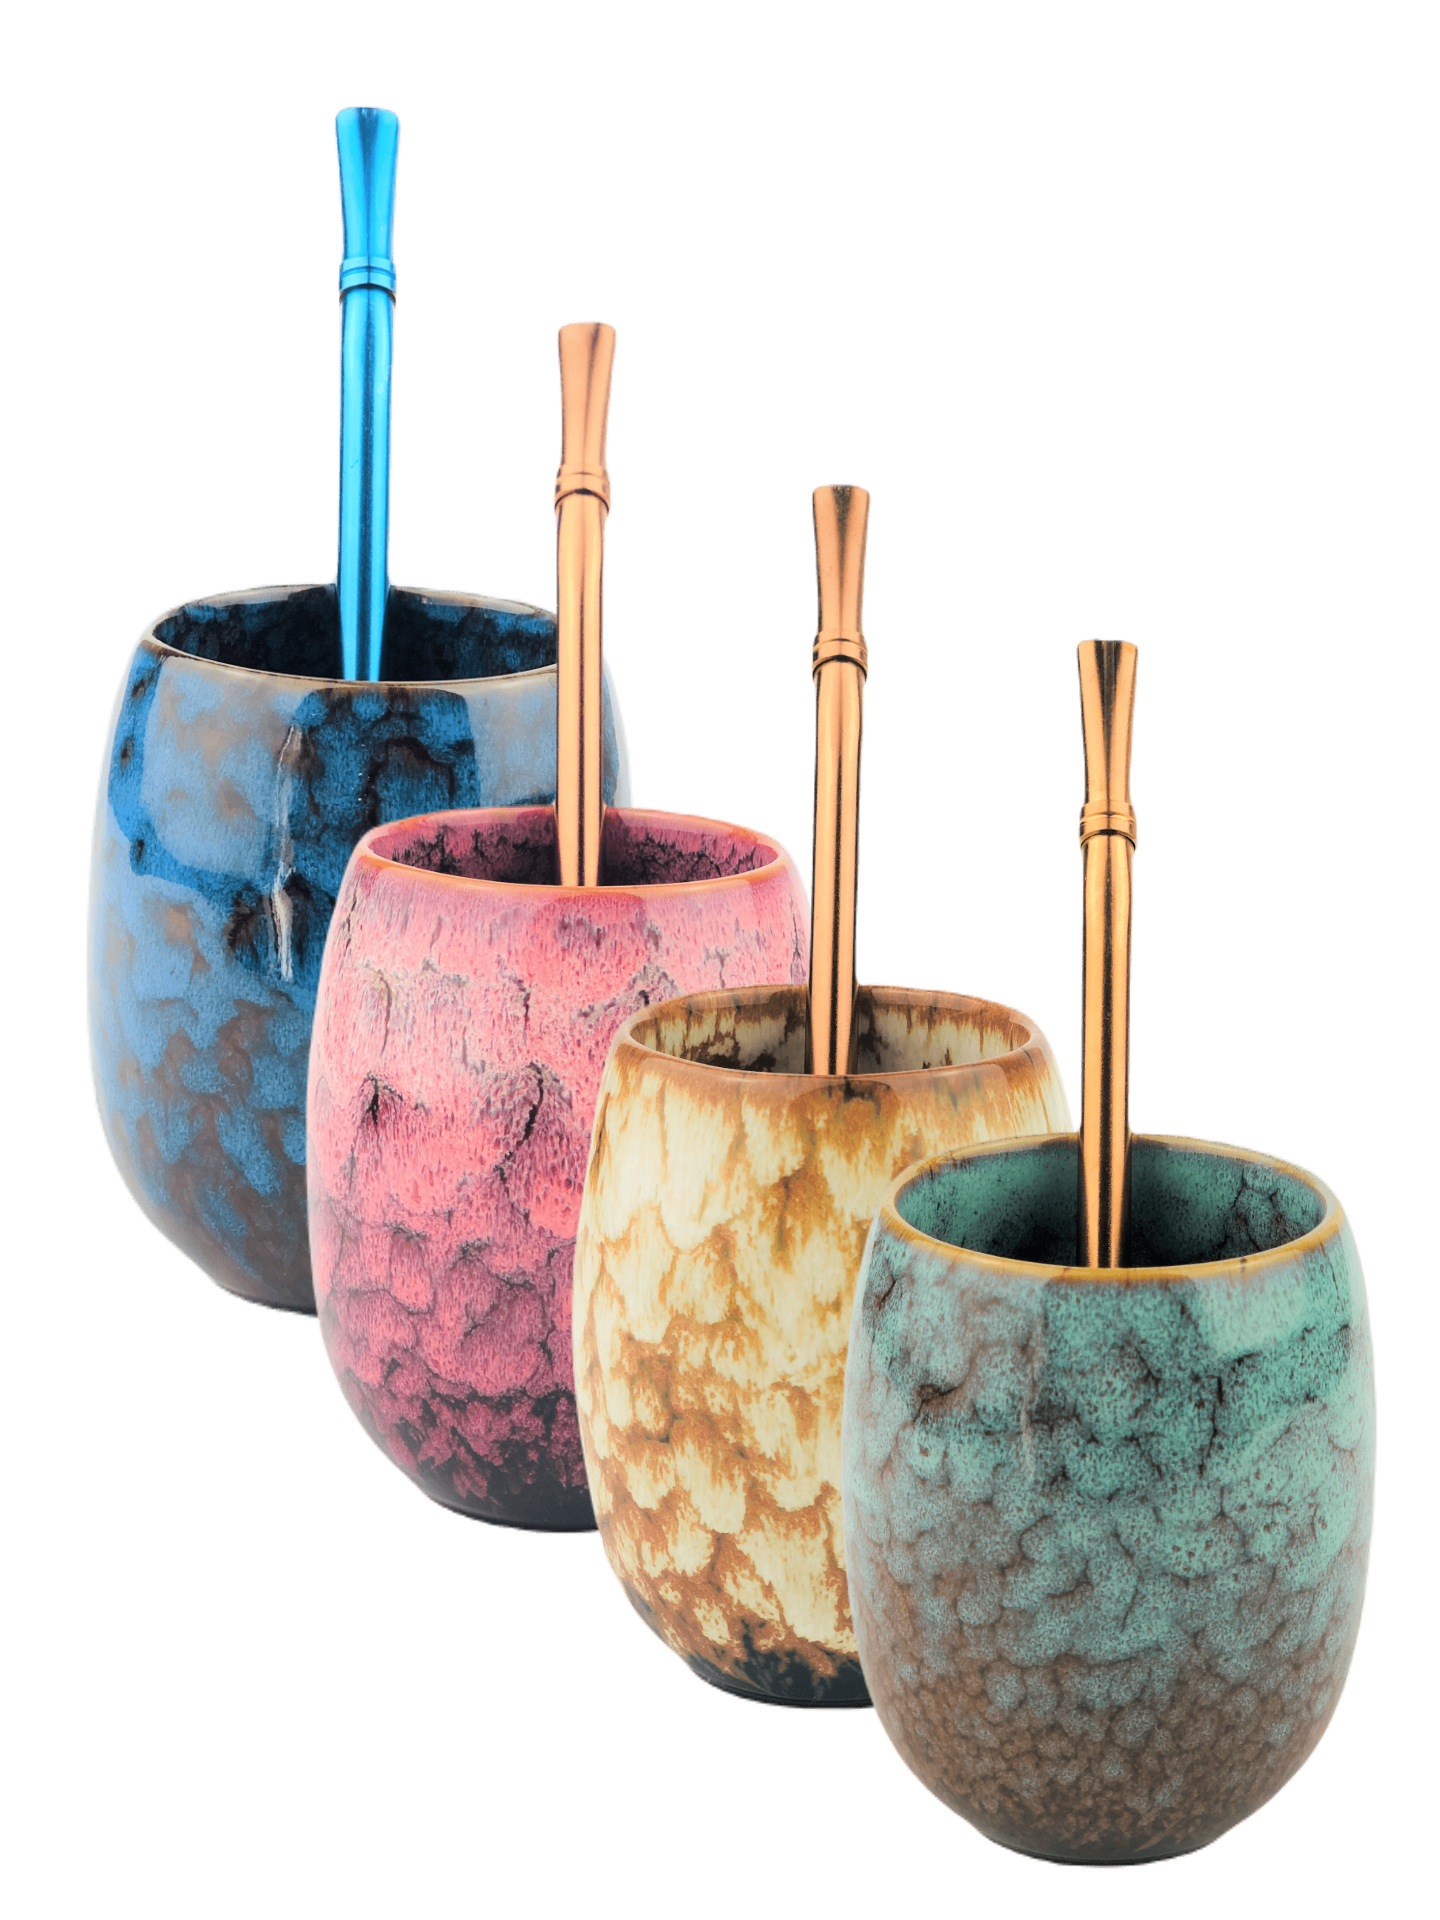 Ceramic Mate Gourd and Straw Set (Mate and bombilla)